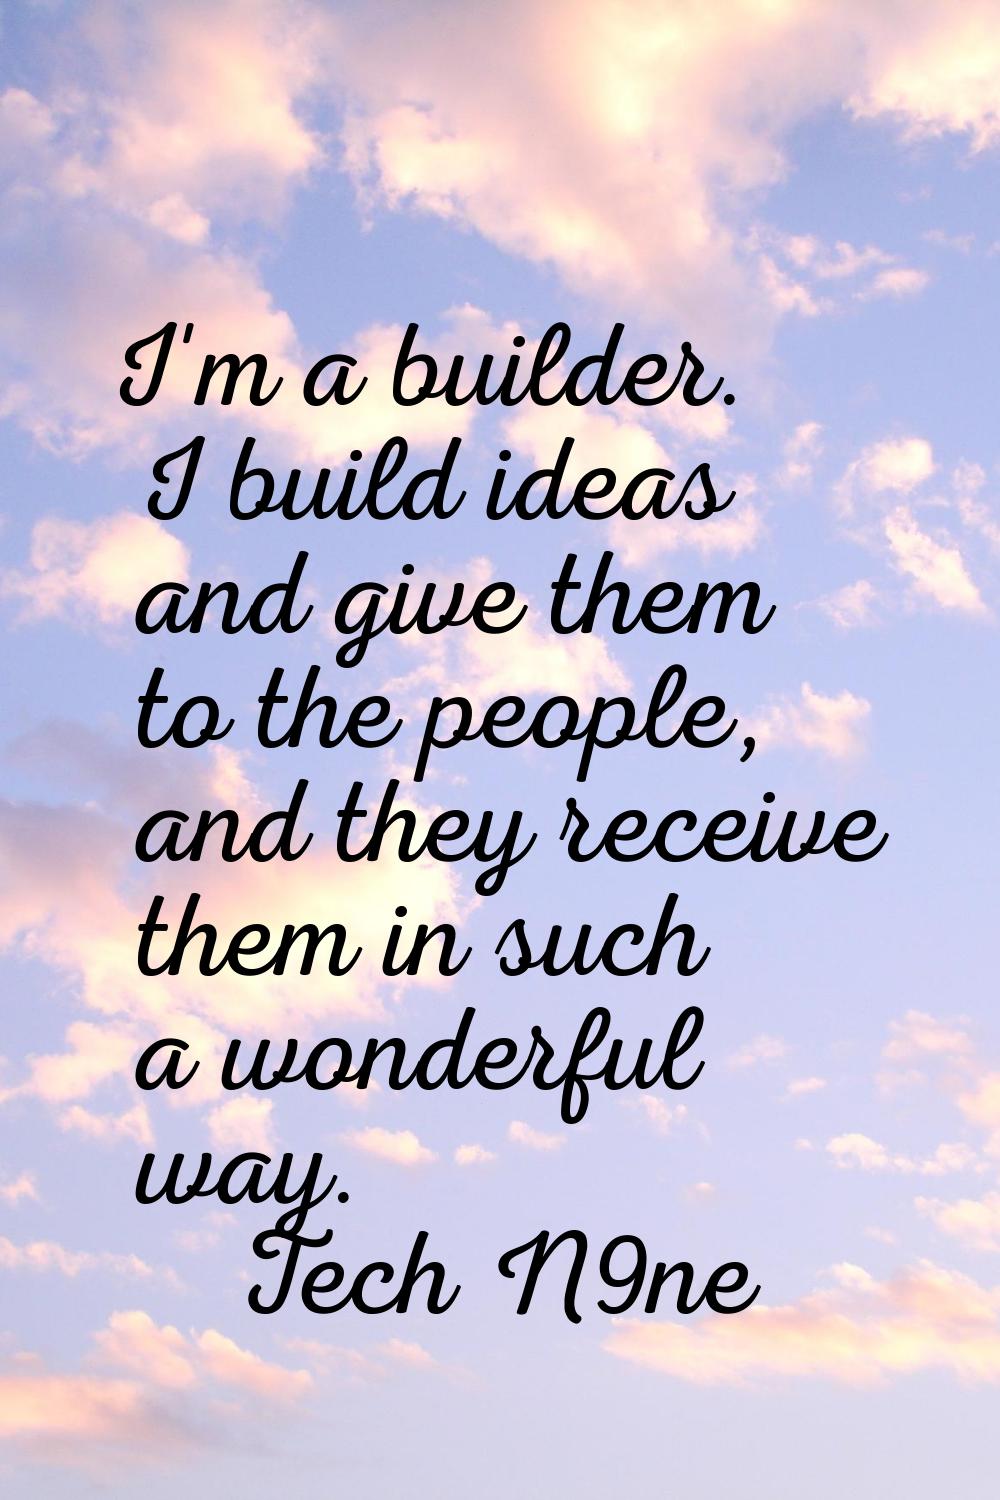 I'm a builder. I build ideas and give them to the people, and they receive them in such a wonderful